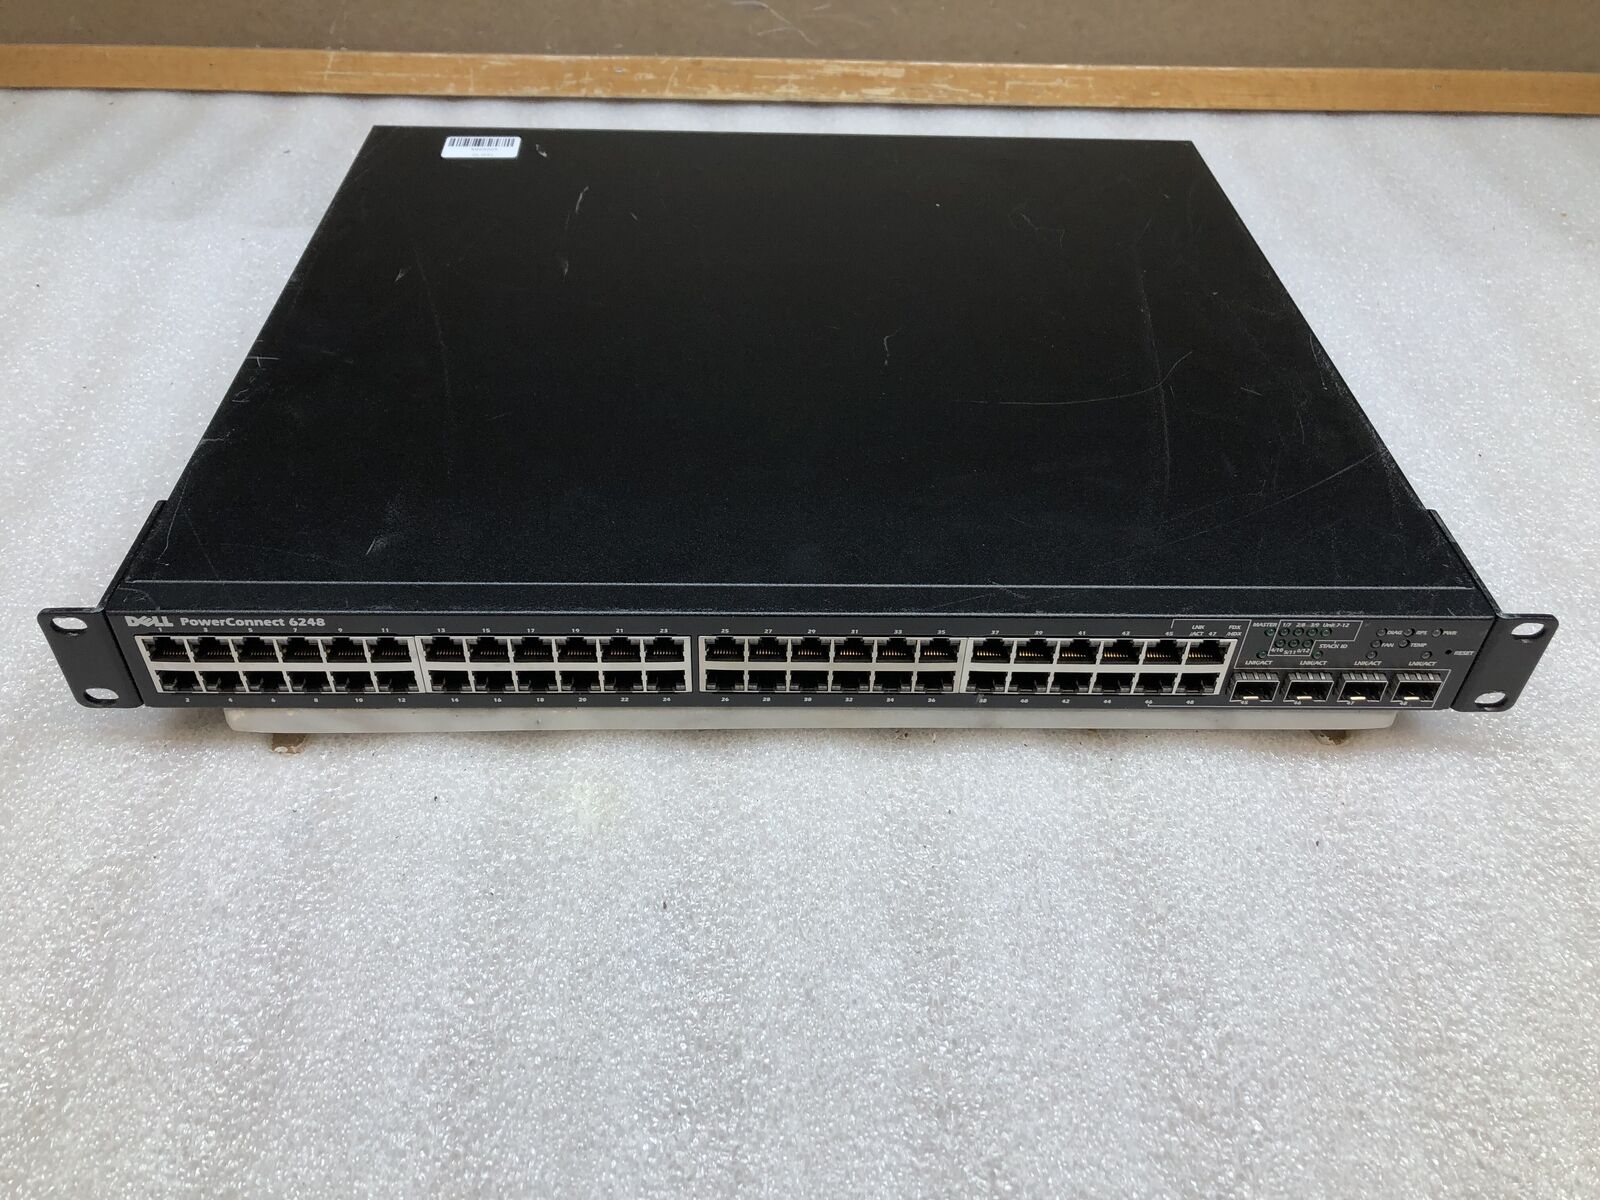 Dell PowerConnect 6248 48-Port Ethernet 4xSFP Gigabyte Network Switch